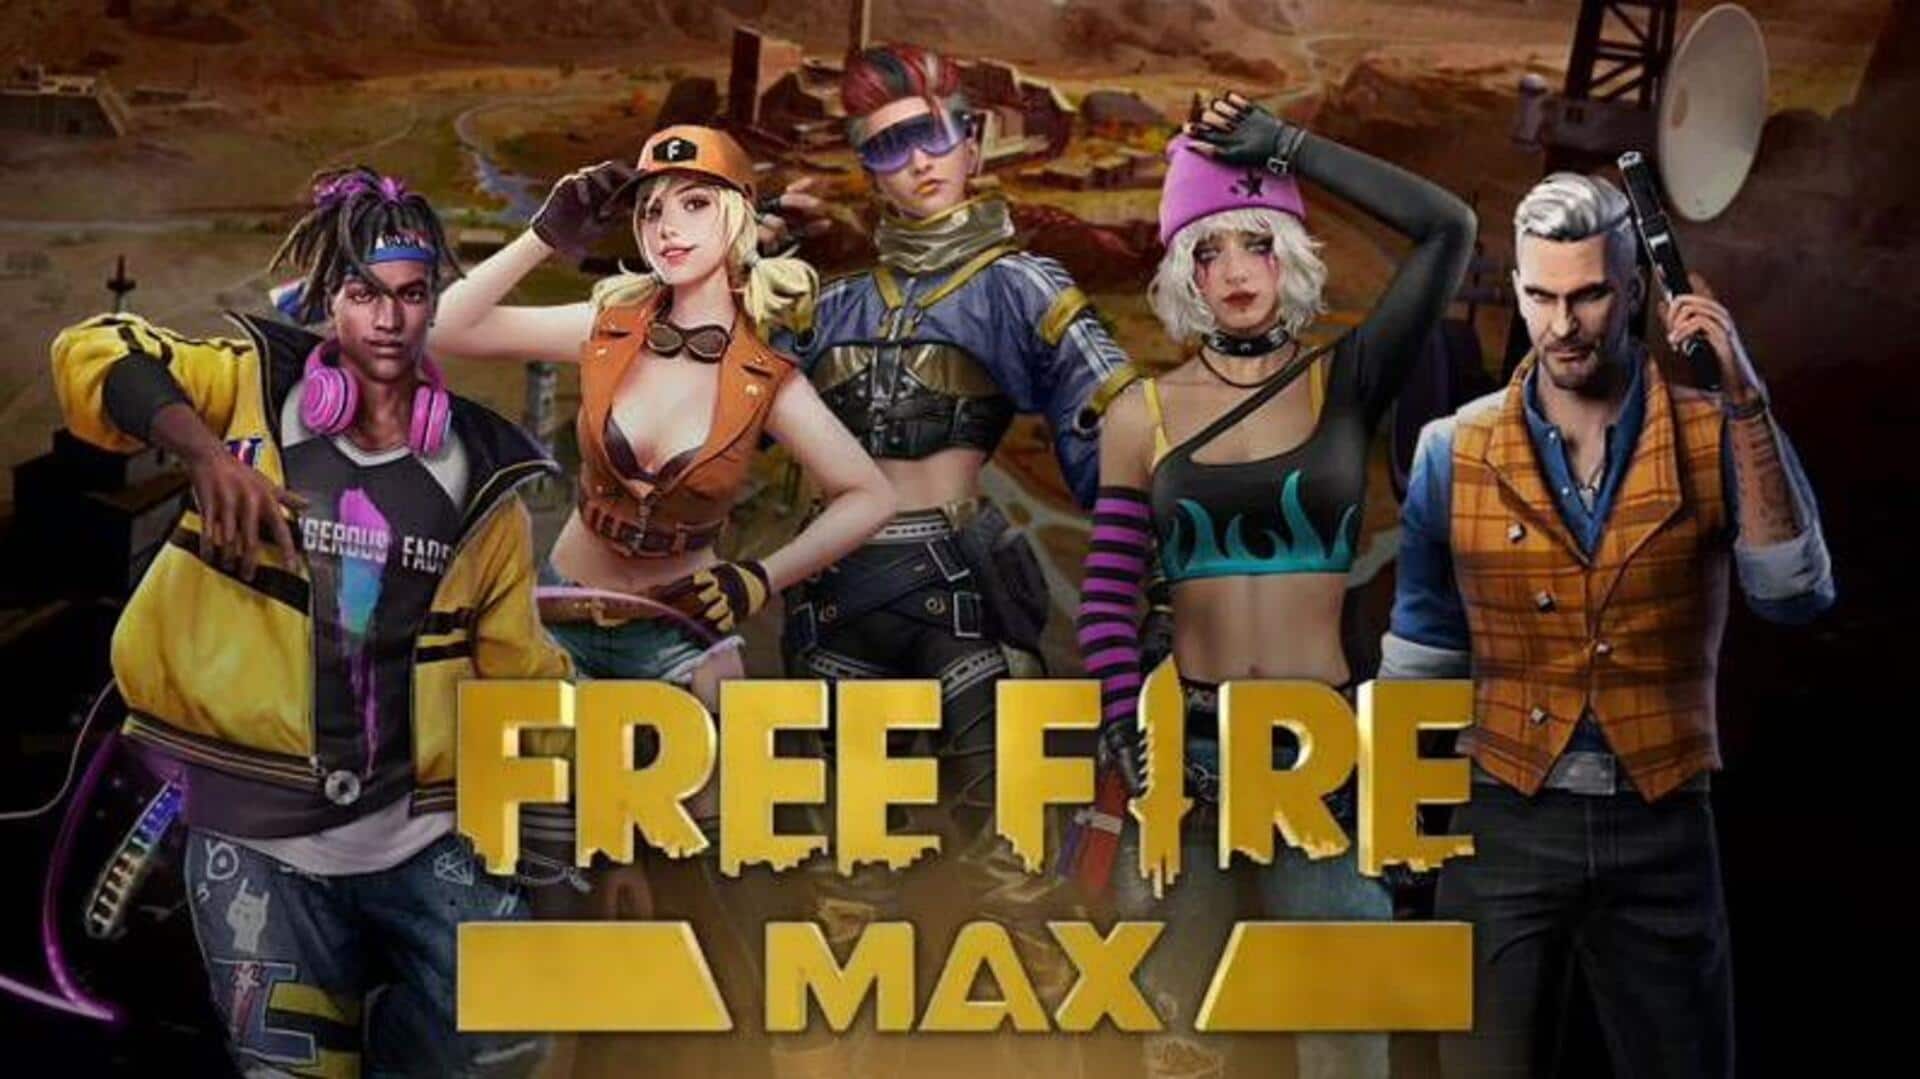 Garena Free Fire redeem codes for August 24: How gamers can claim